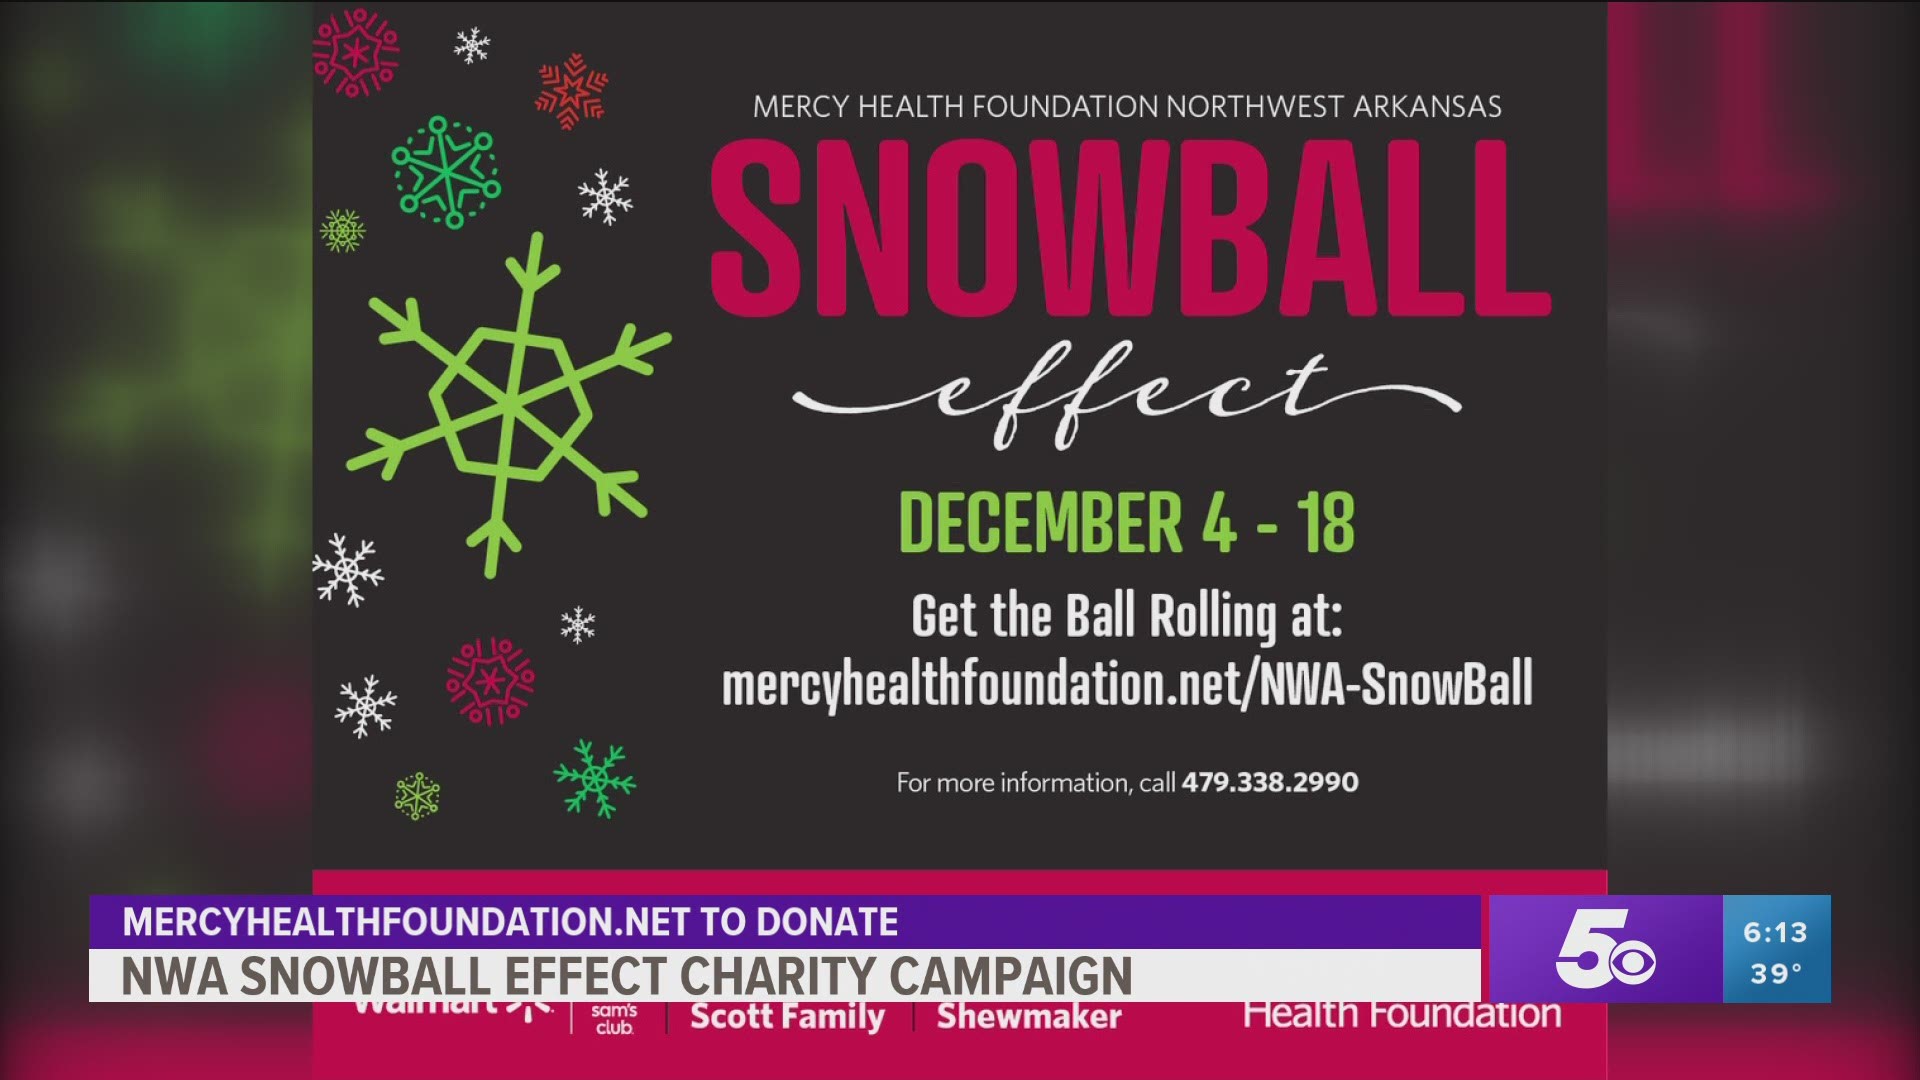 NWA Snowball Effect Charity Campaign